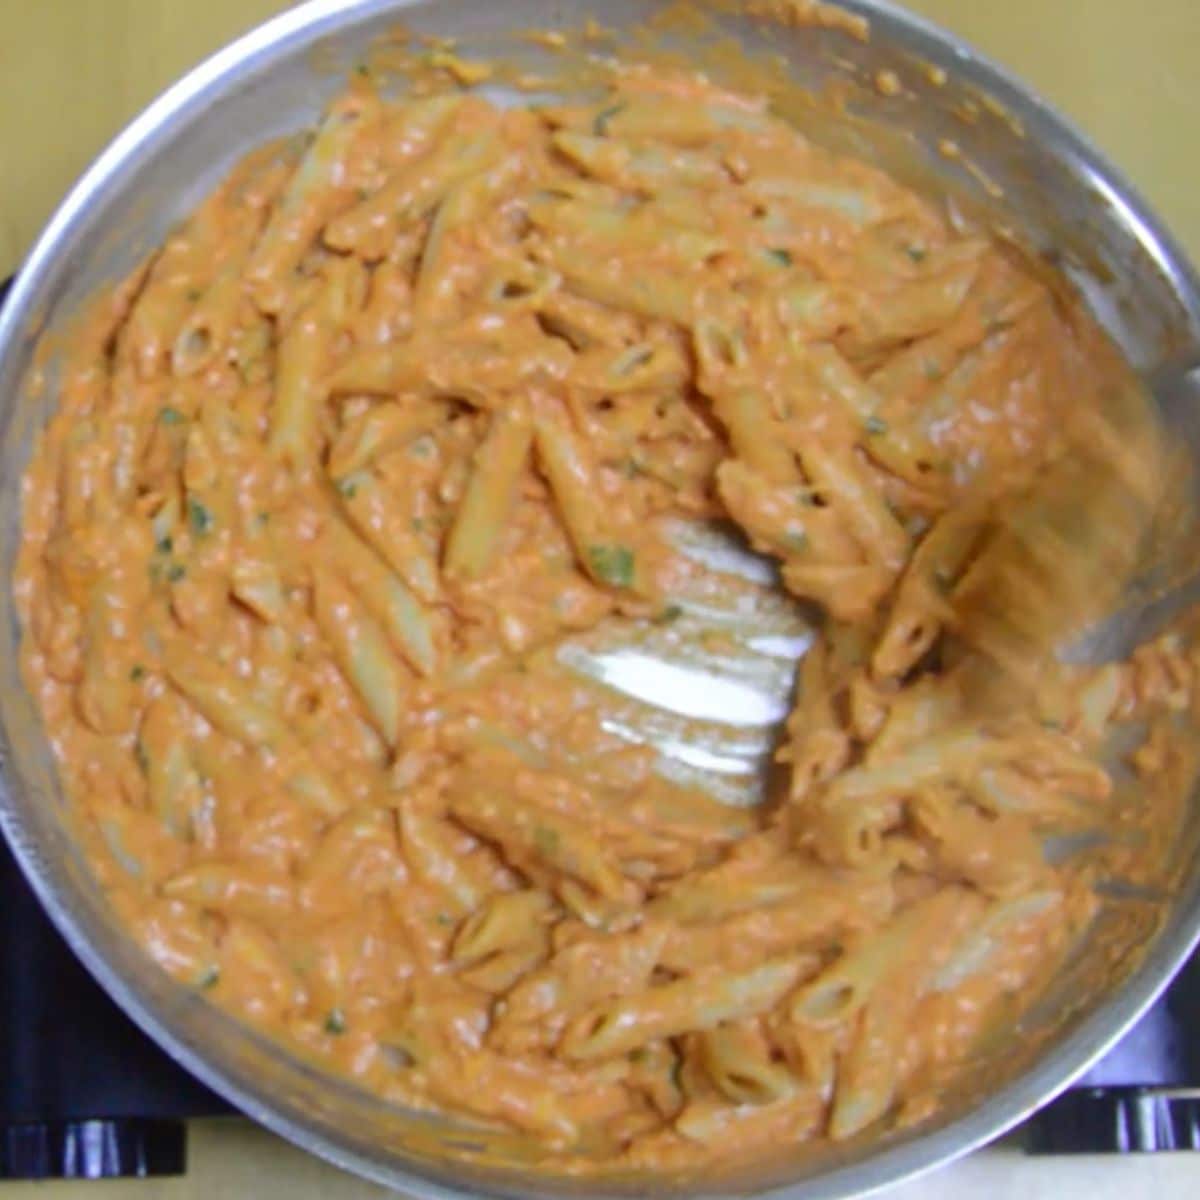 mixing pasta with sauce in a steel pan with a wooden spoon.